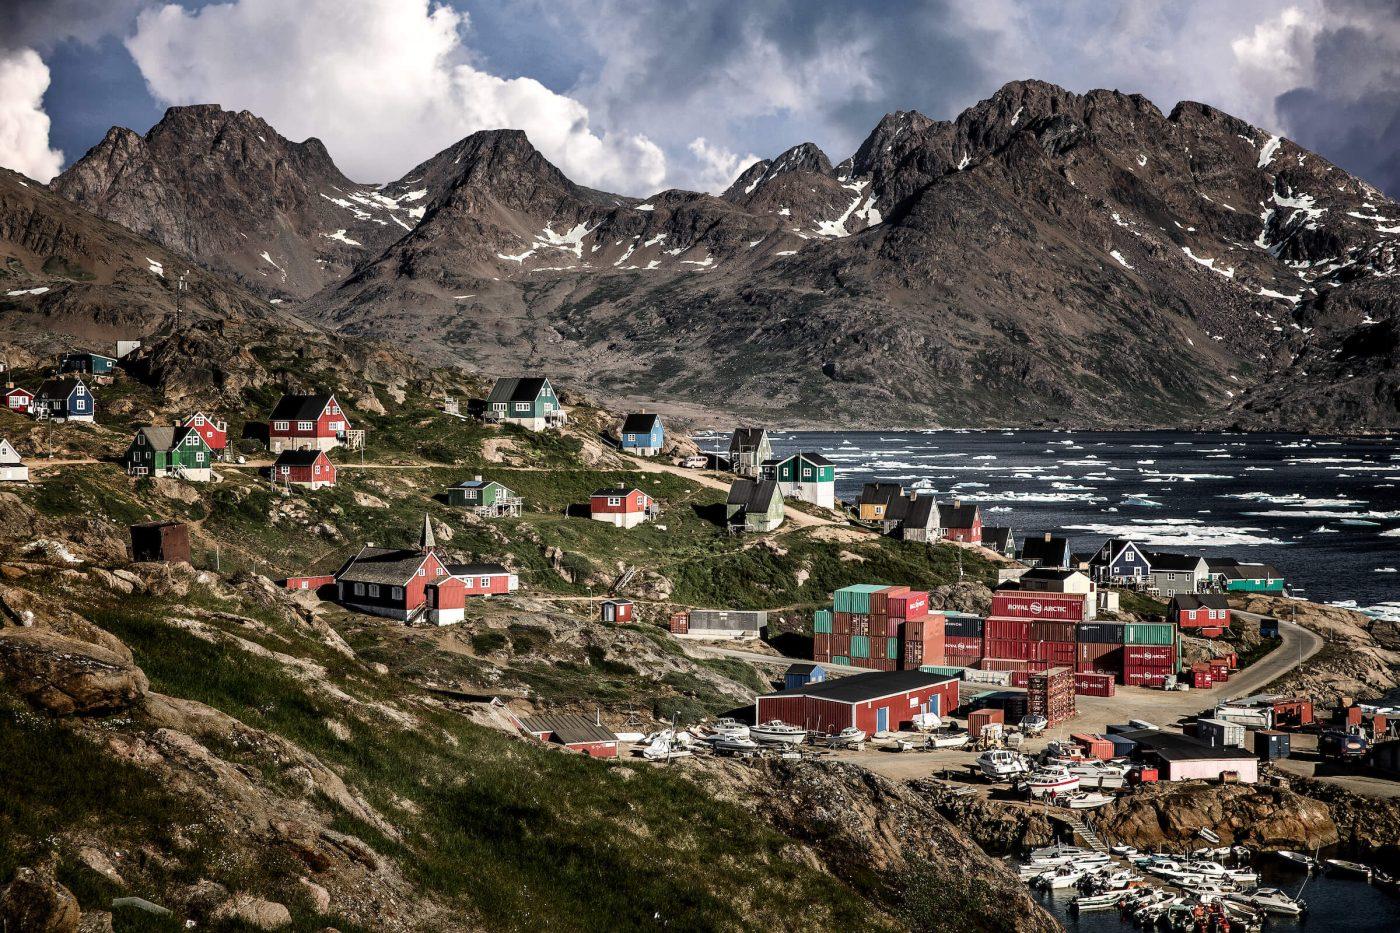 A summer view over parts of Tasiilaq in East Greenland. By Mads Pihl